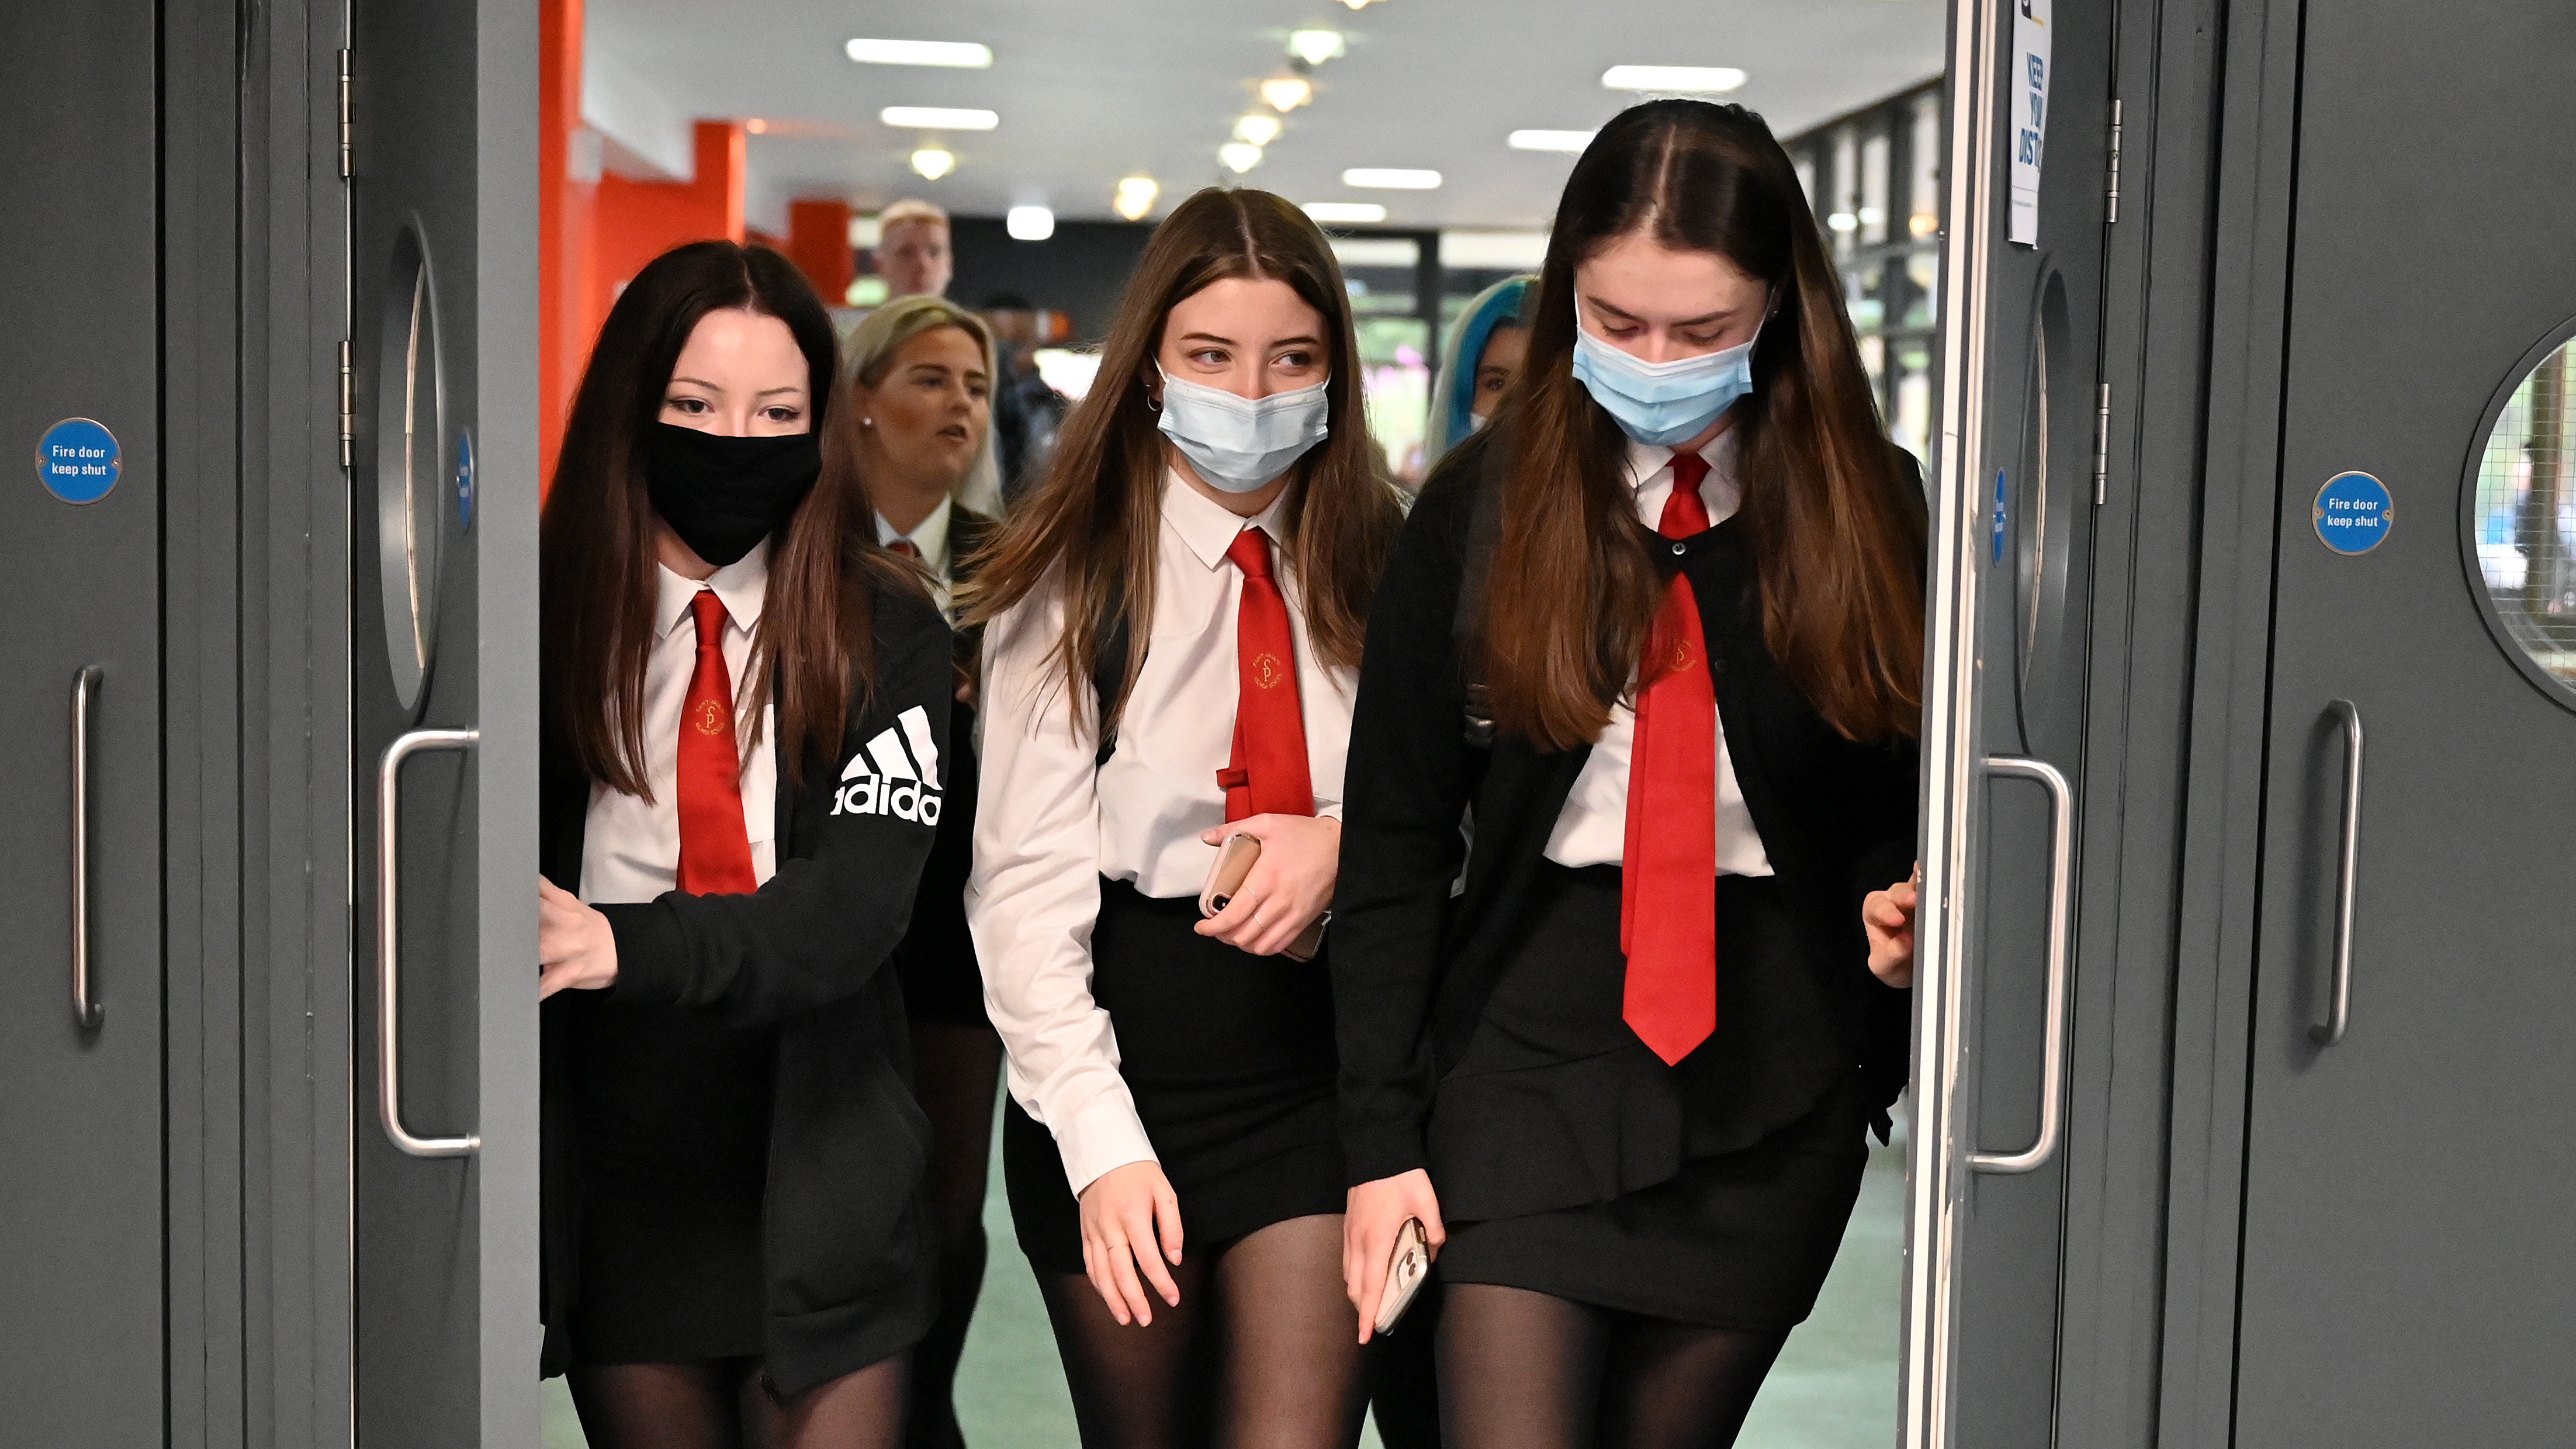 Pupils returning to school after the third lockdown